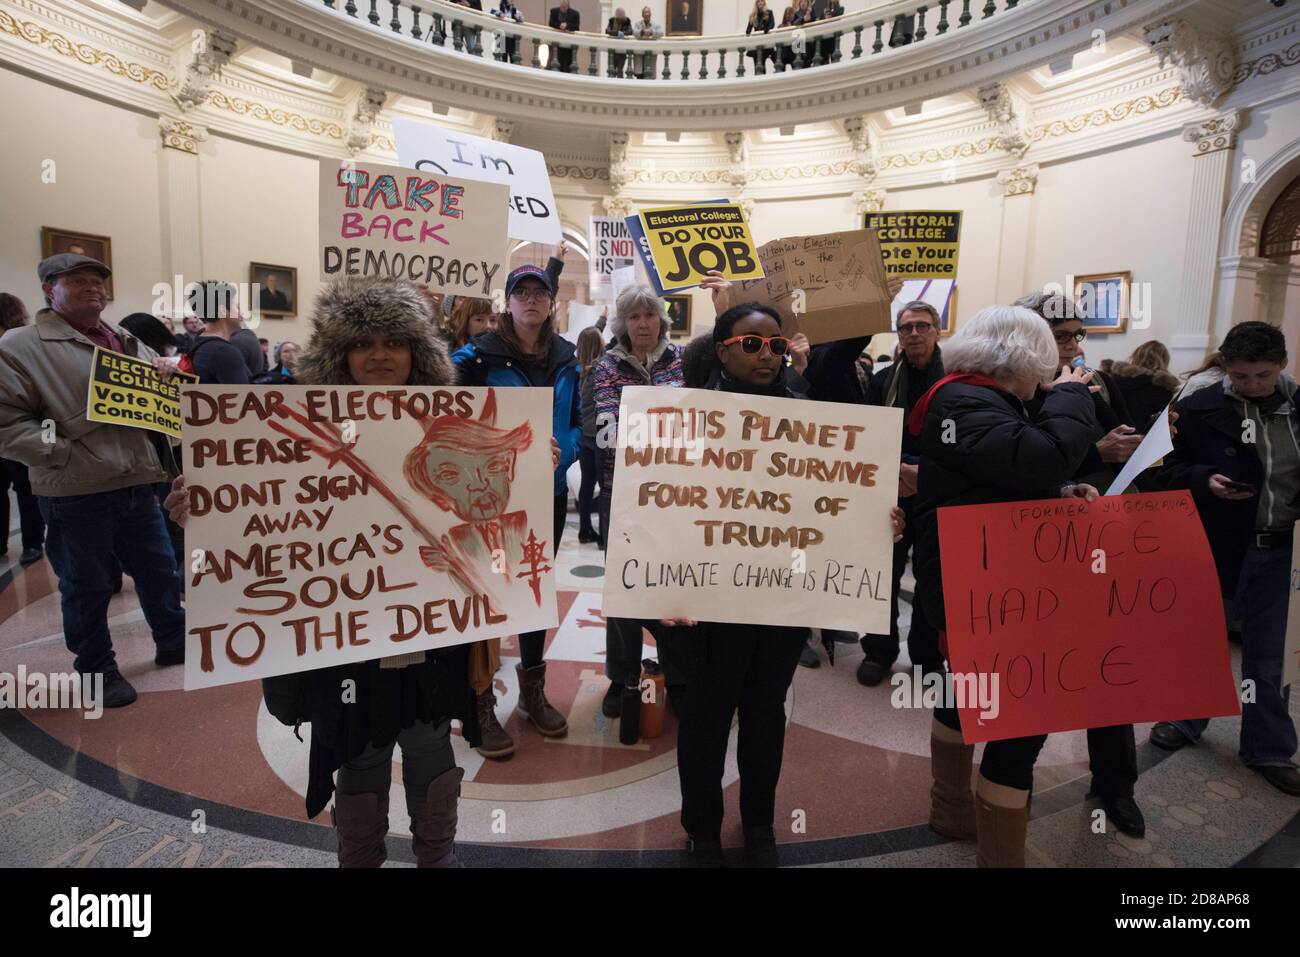 Austin Texas December 19, 2016: Protesters demonstrating alleged Russian interference in the U.S. presidential election gather in the rotunda of the Texas Capitol as Texas electors to the U.S. Electoral College meet at the Texas Capitol to cast votes for President Donald Trump and Vice-President Mike Pence. Stock Photo